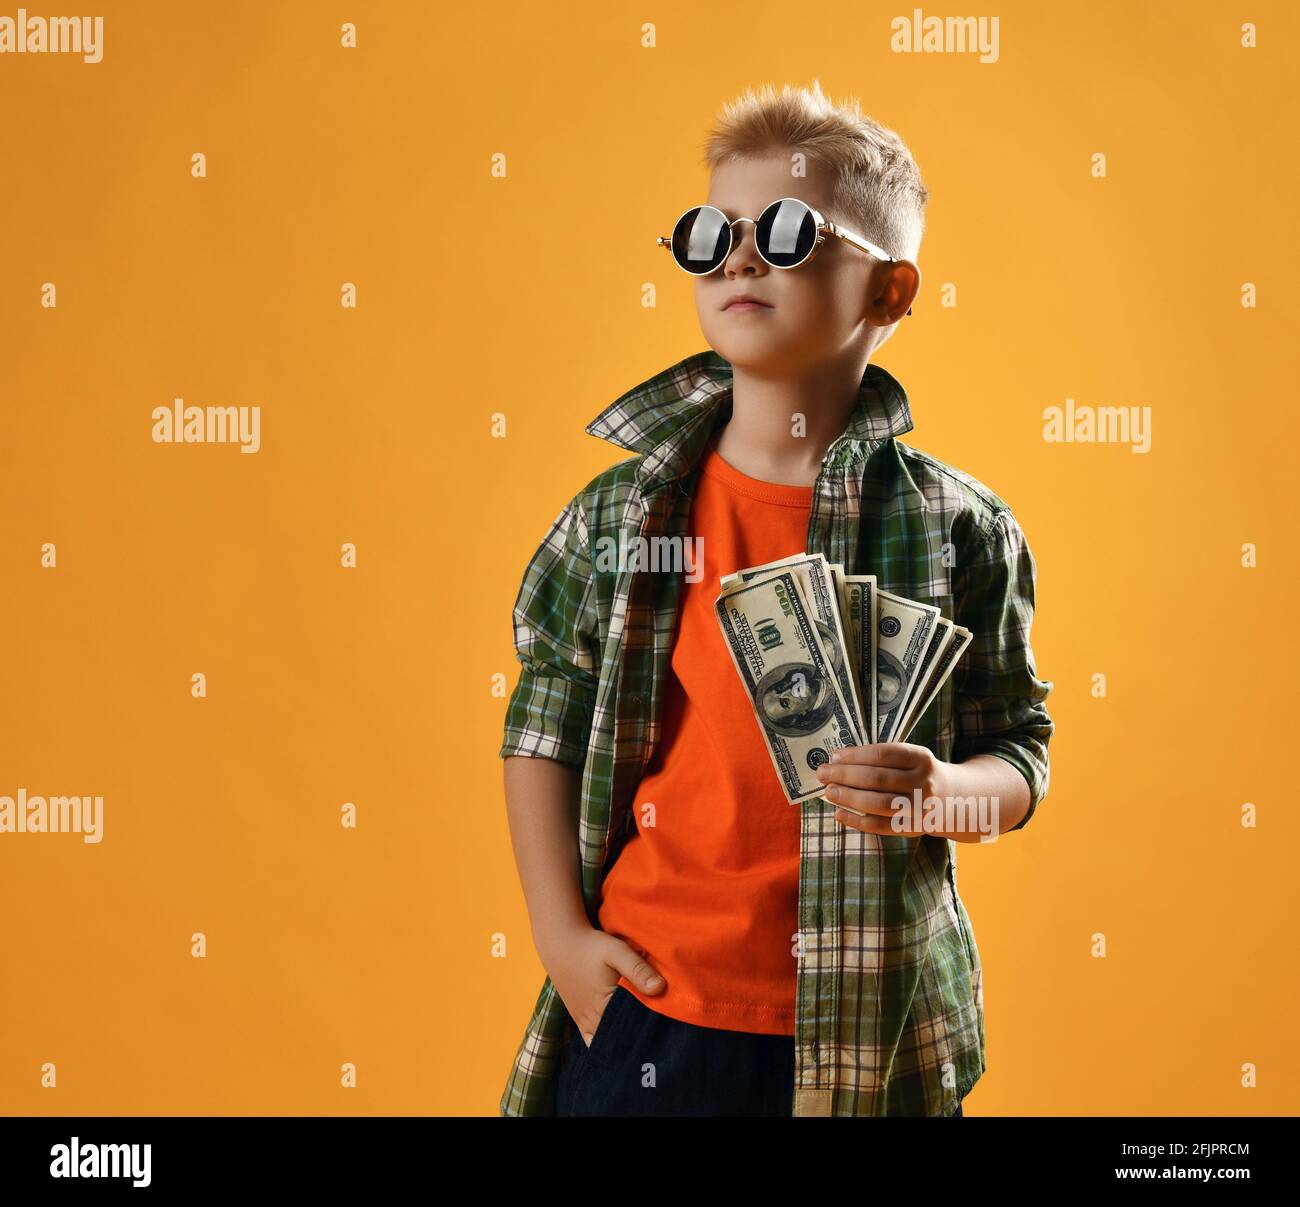 Calm self-confident rich teenager boy in round sunglasses, checkered plaid shirt and jeans stands holding fan of cash Stock Photo